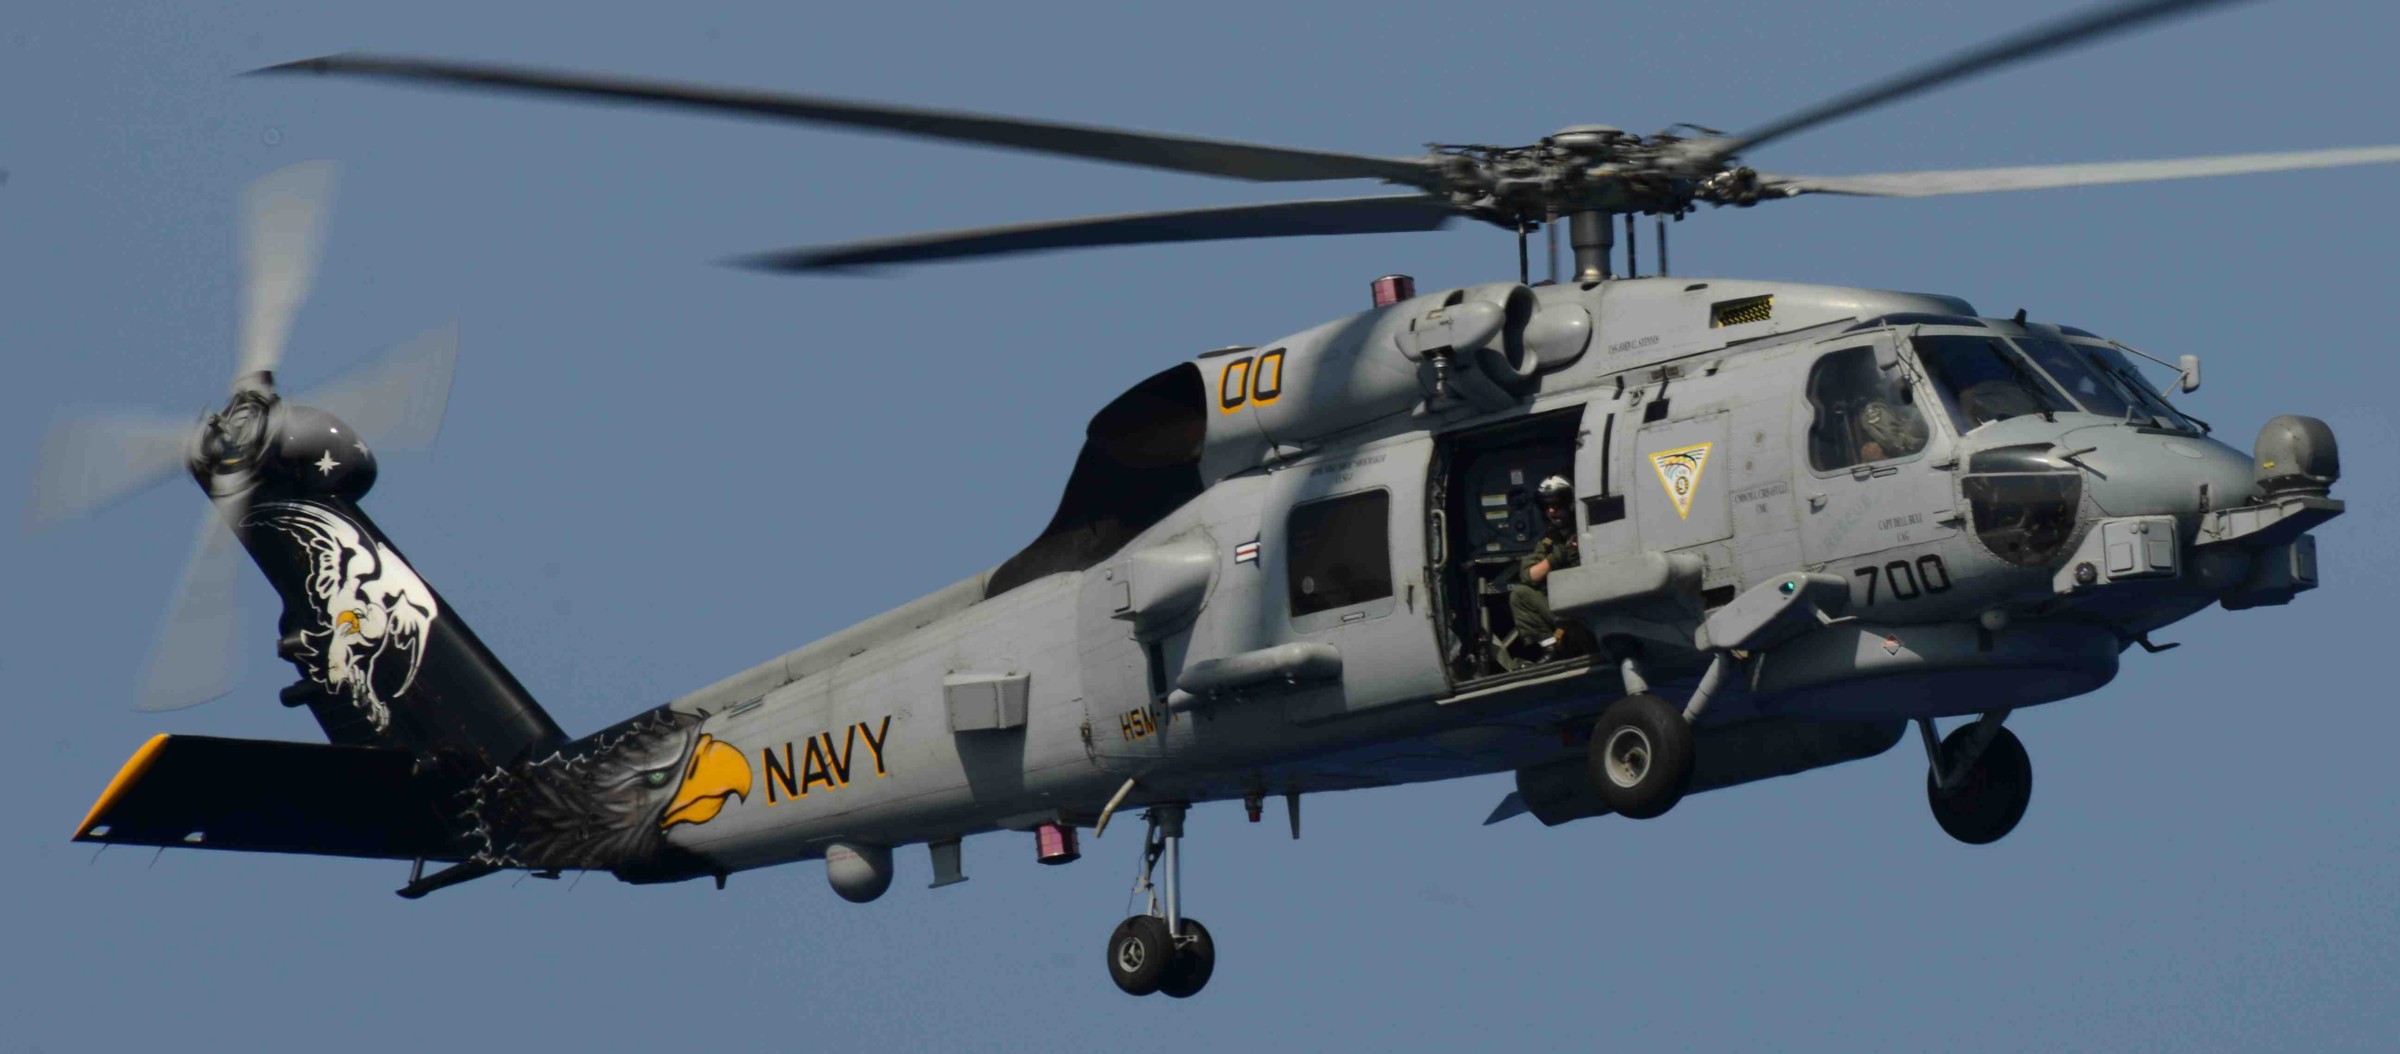 hsm-71 raptors helicopter maritime strike squadron mh-60r seahawk navy 2013 80